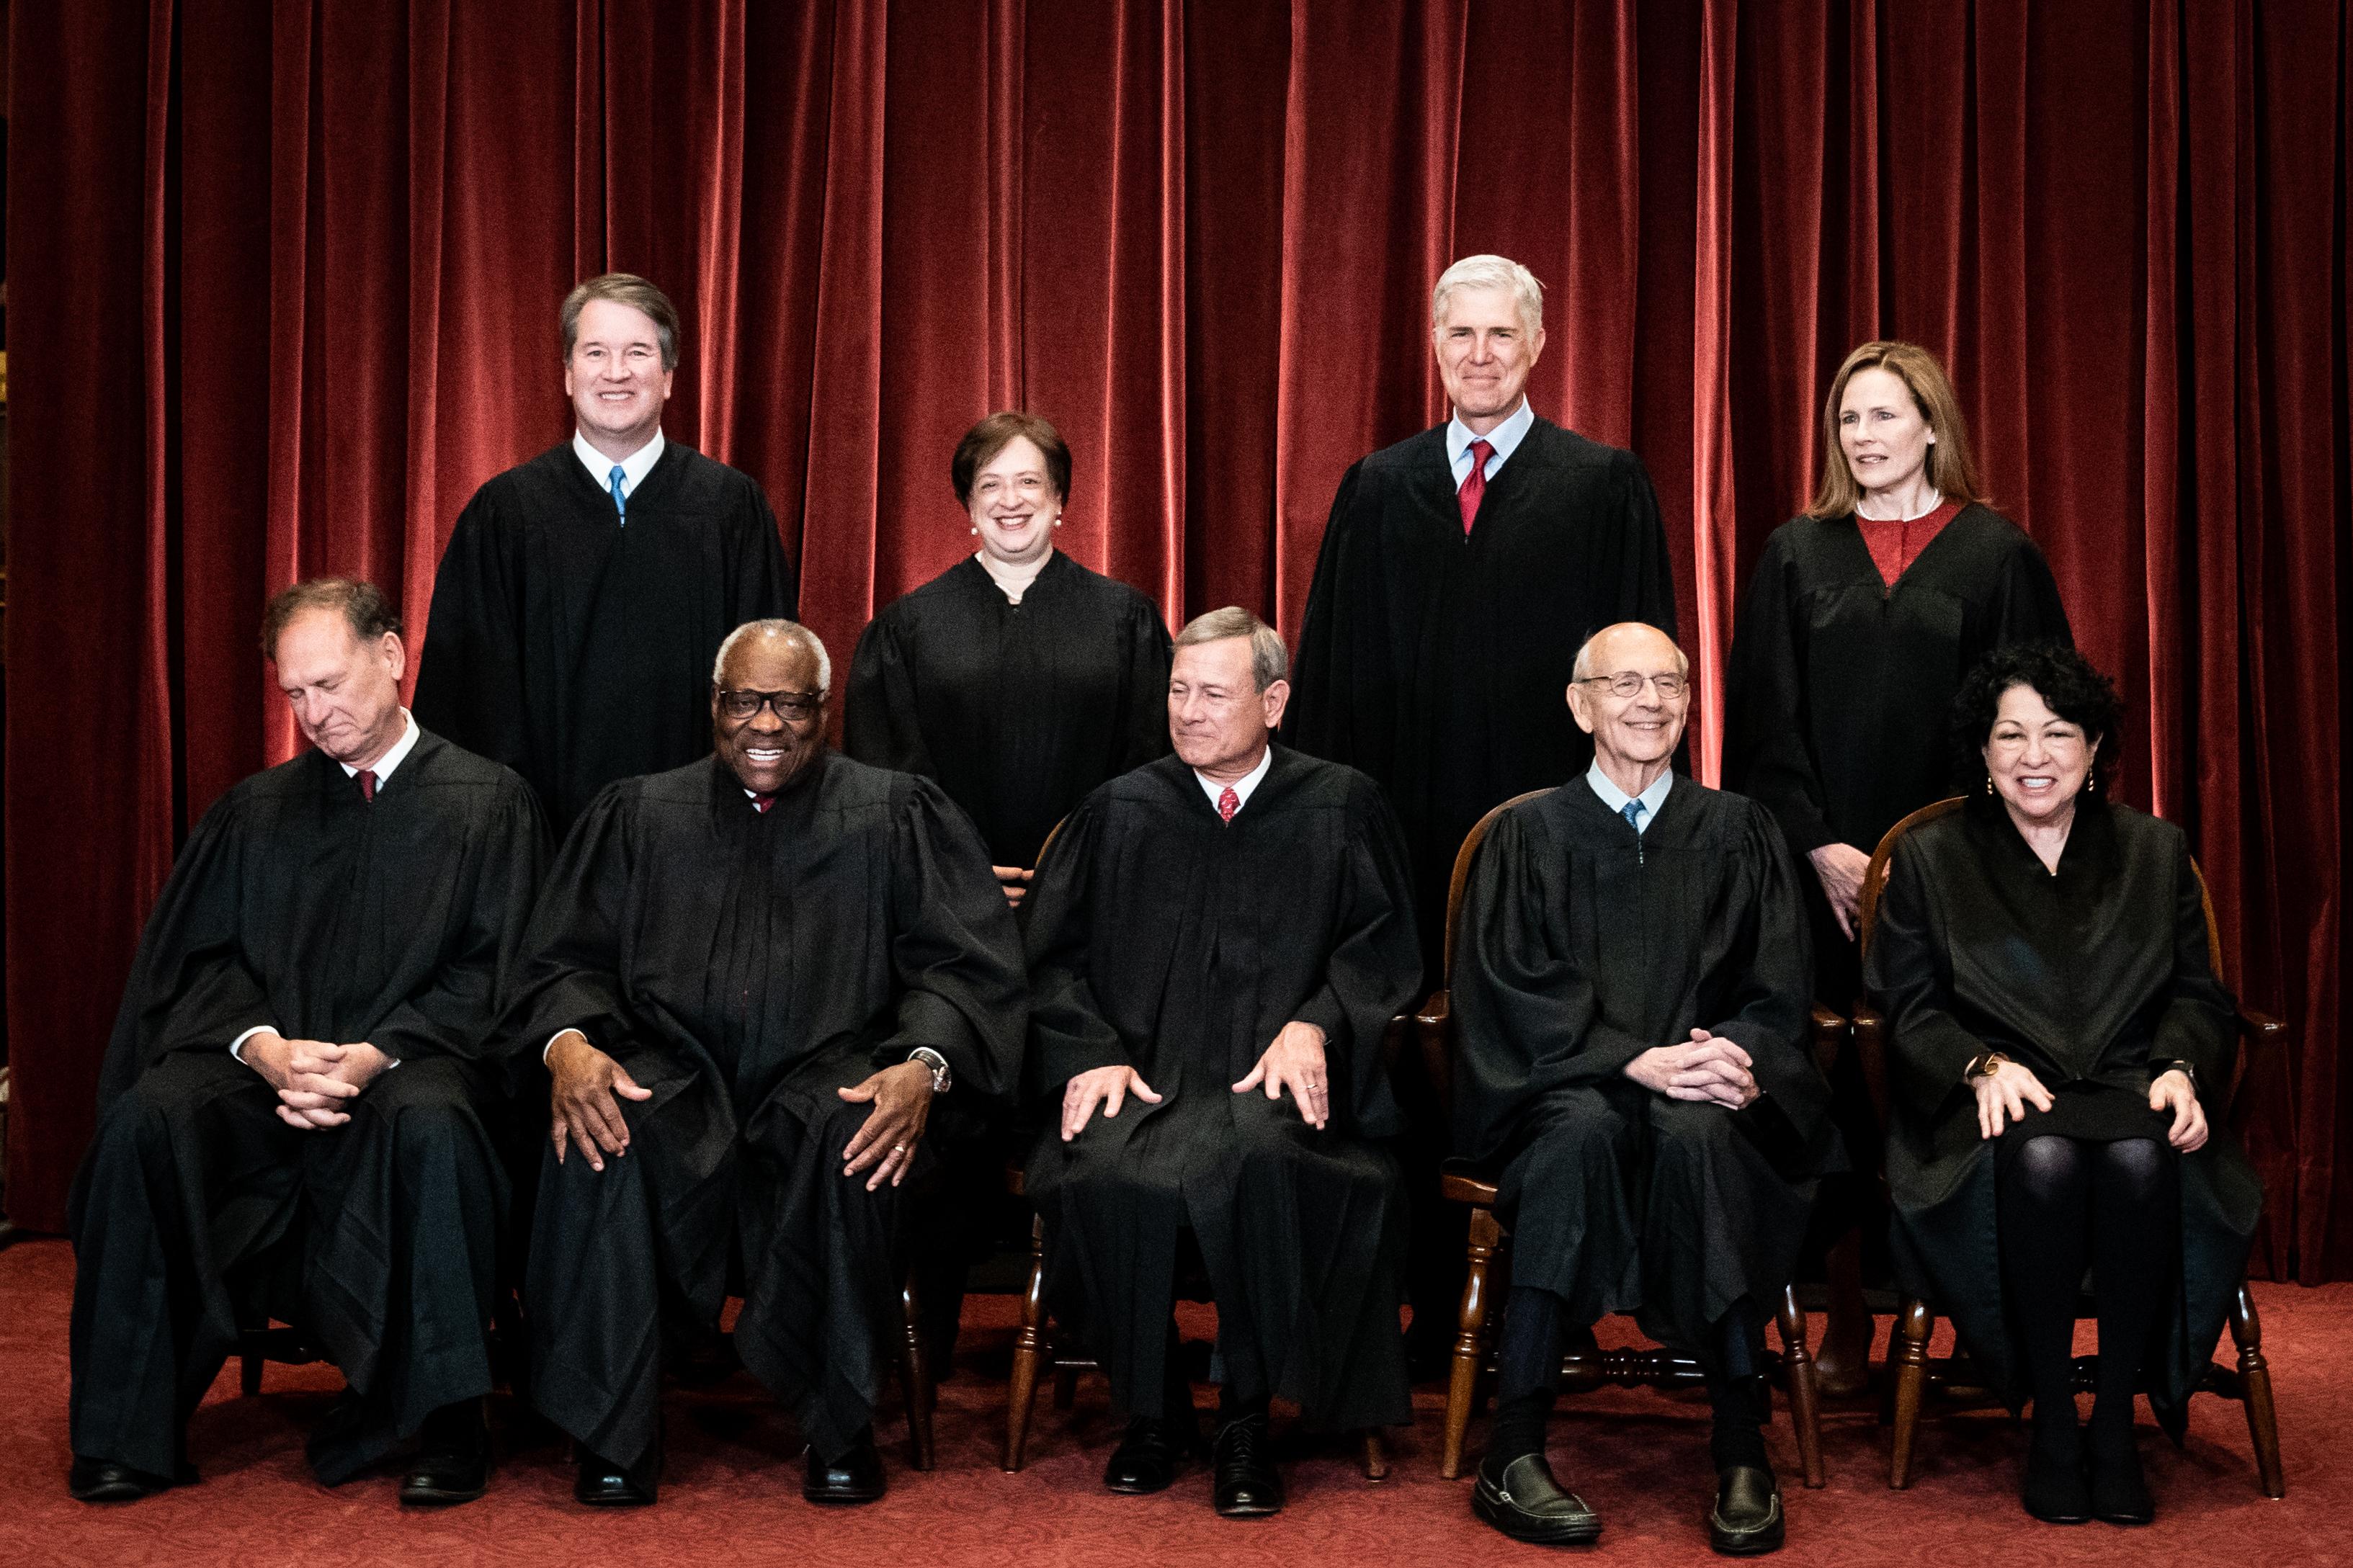 Candid photo of the justices laughing and smiling and seated in their robes in front of a red curtain